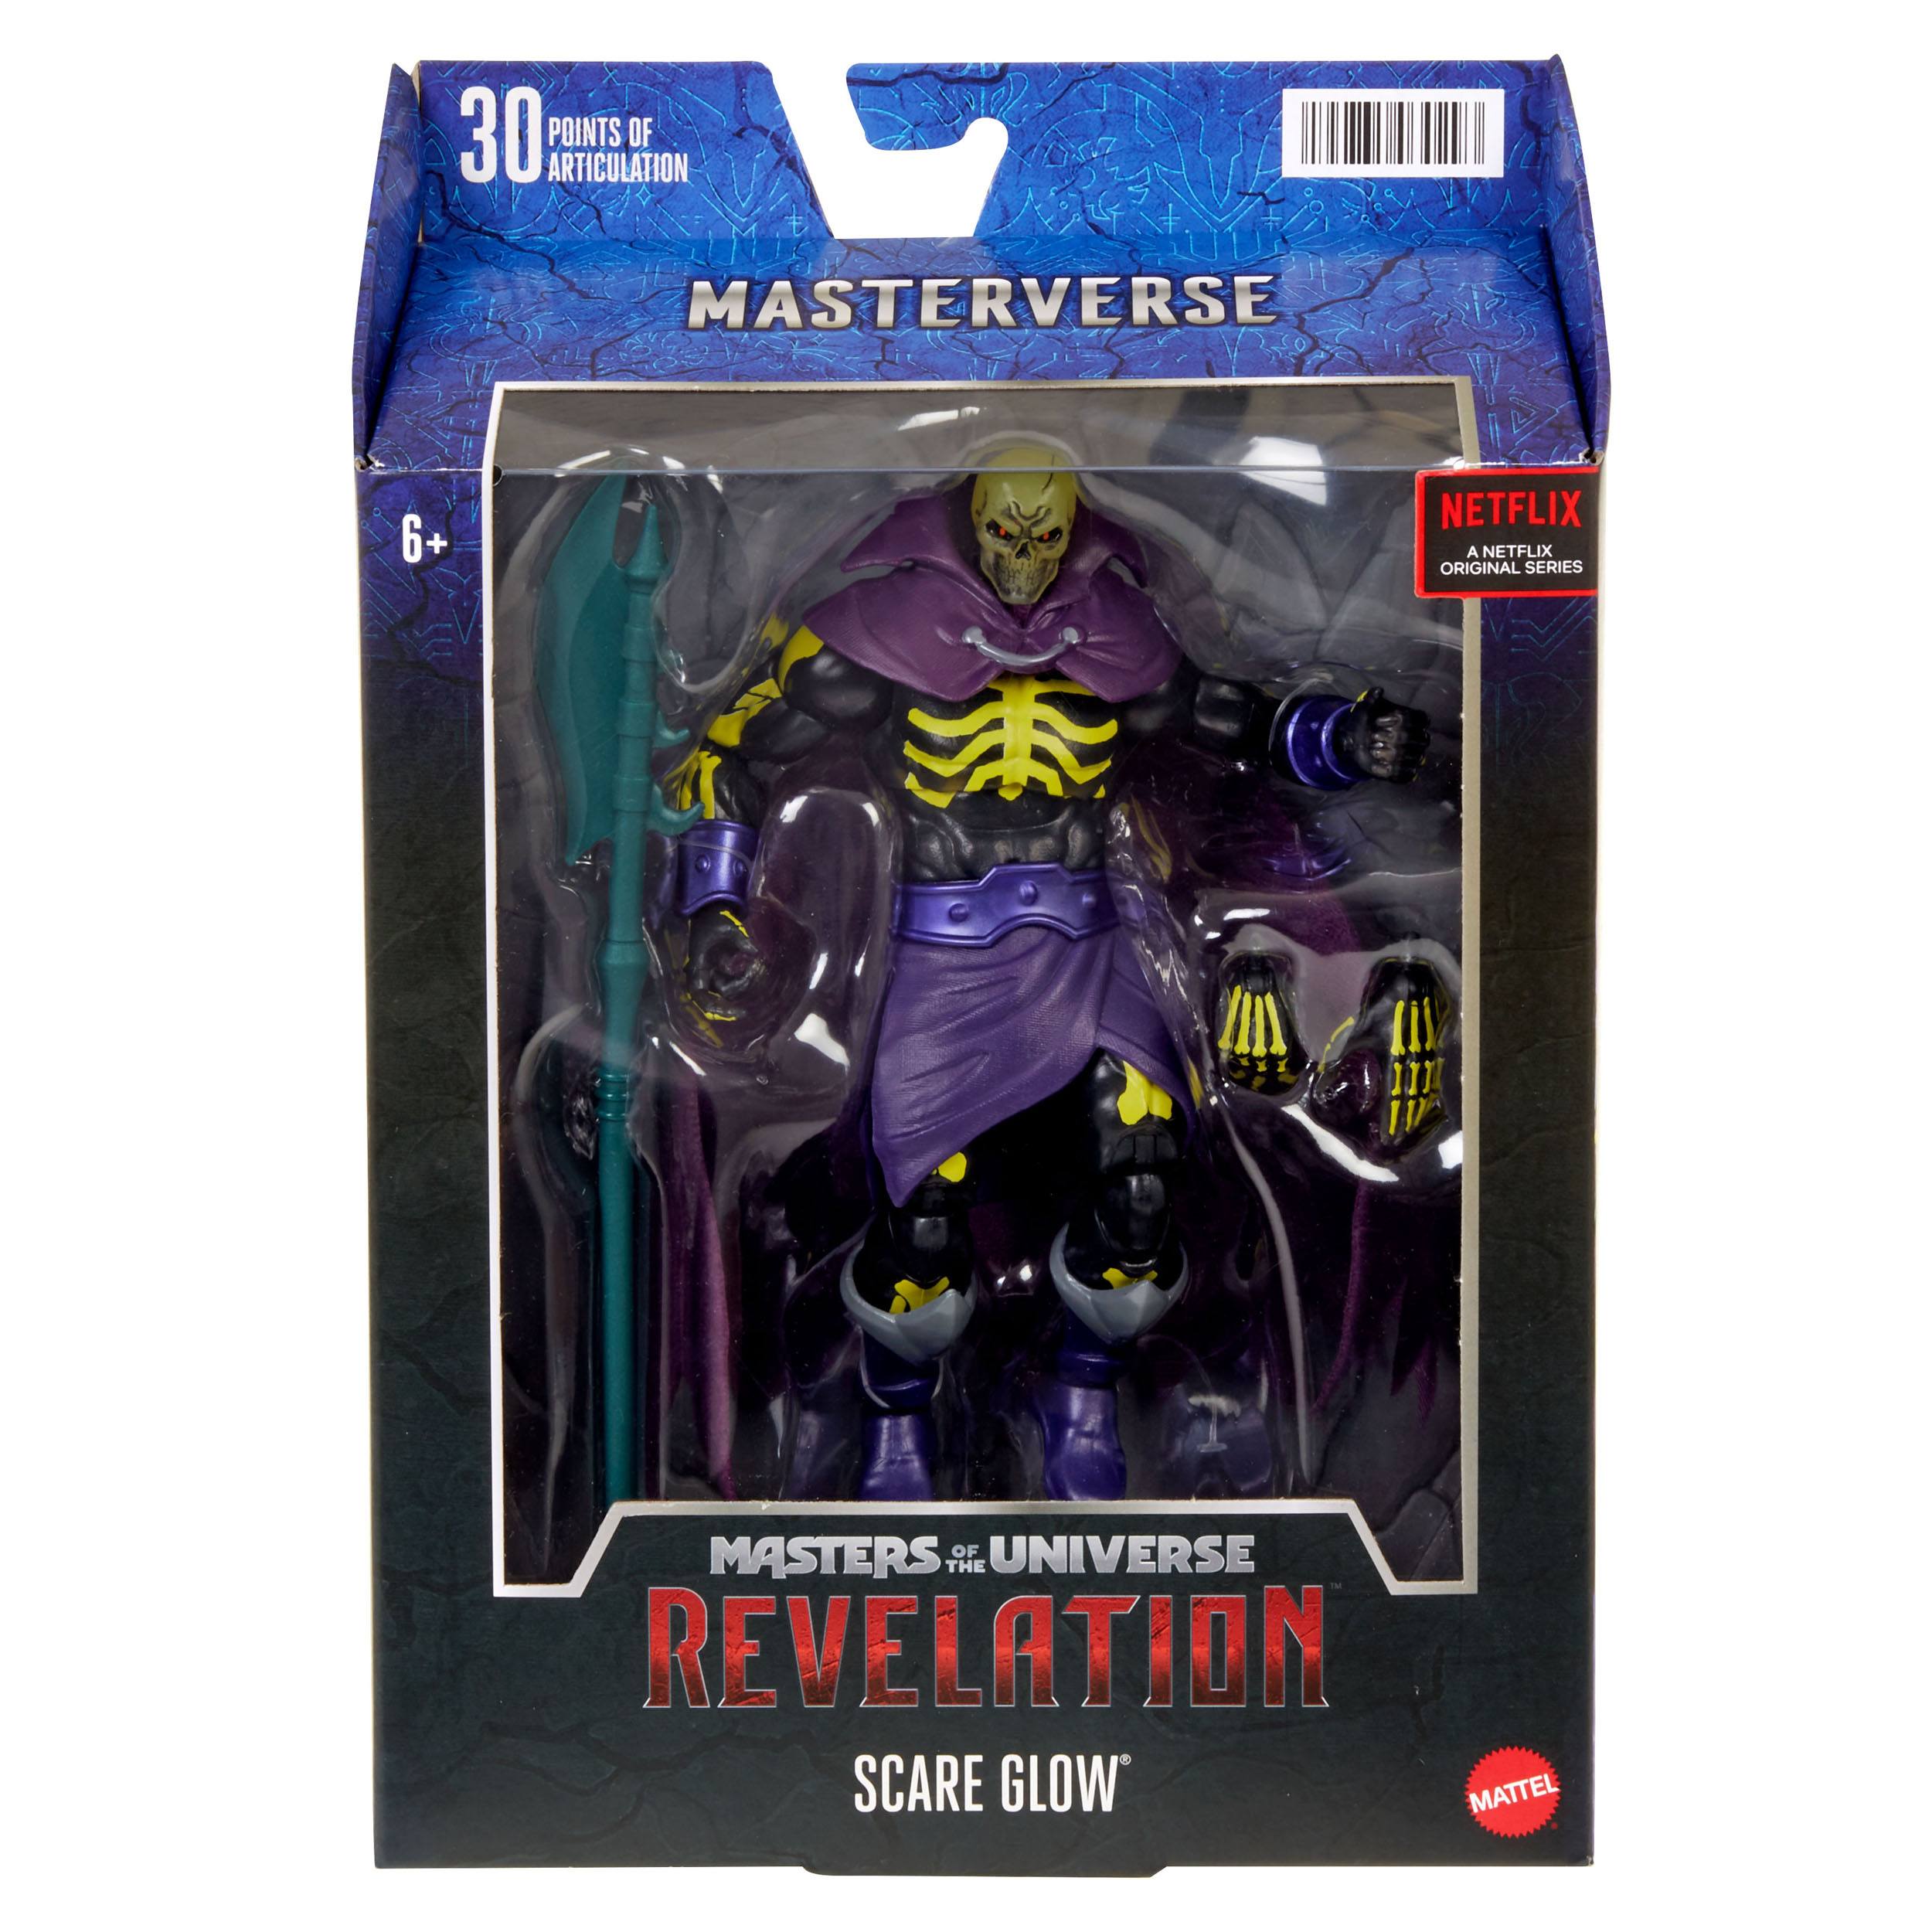 Masters of the Universe Masterverse / Revelation Scare Glow (ca. 18 cm) HDR33 0194735030293